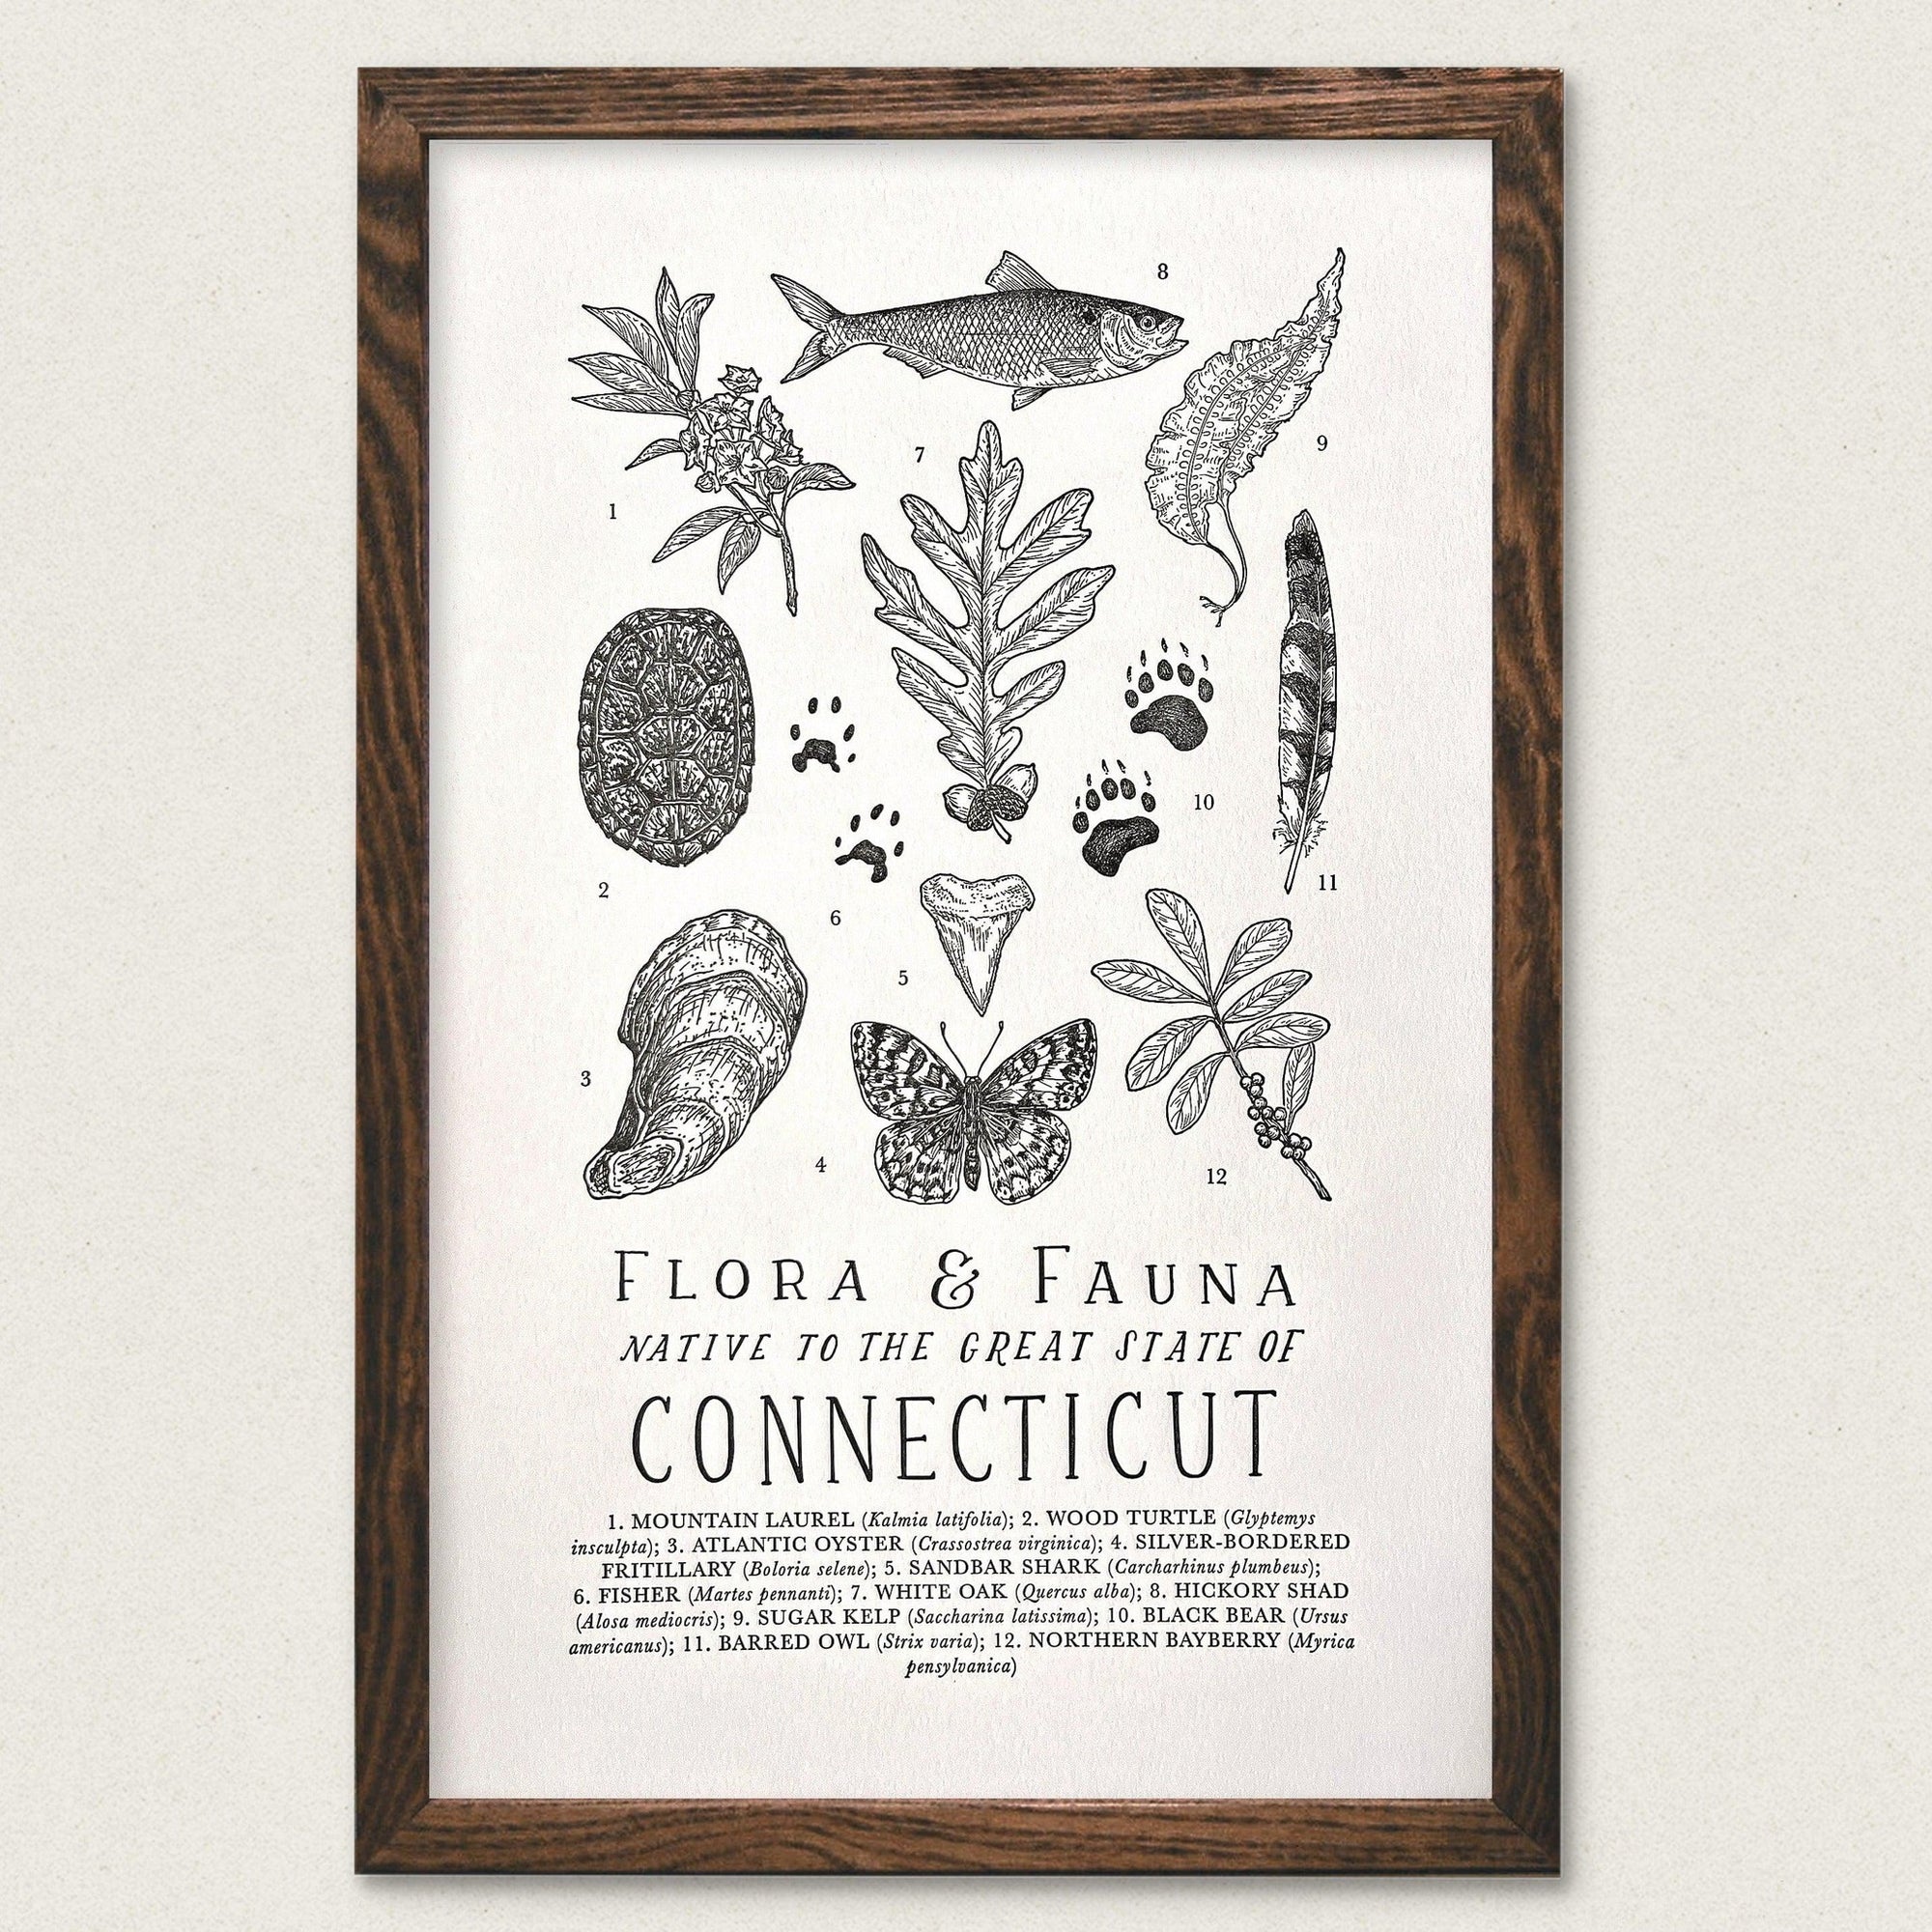 Connecticut Field Guide Letterpress Print featuring flora and fauna from Connecticut by The Wild Wander.